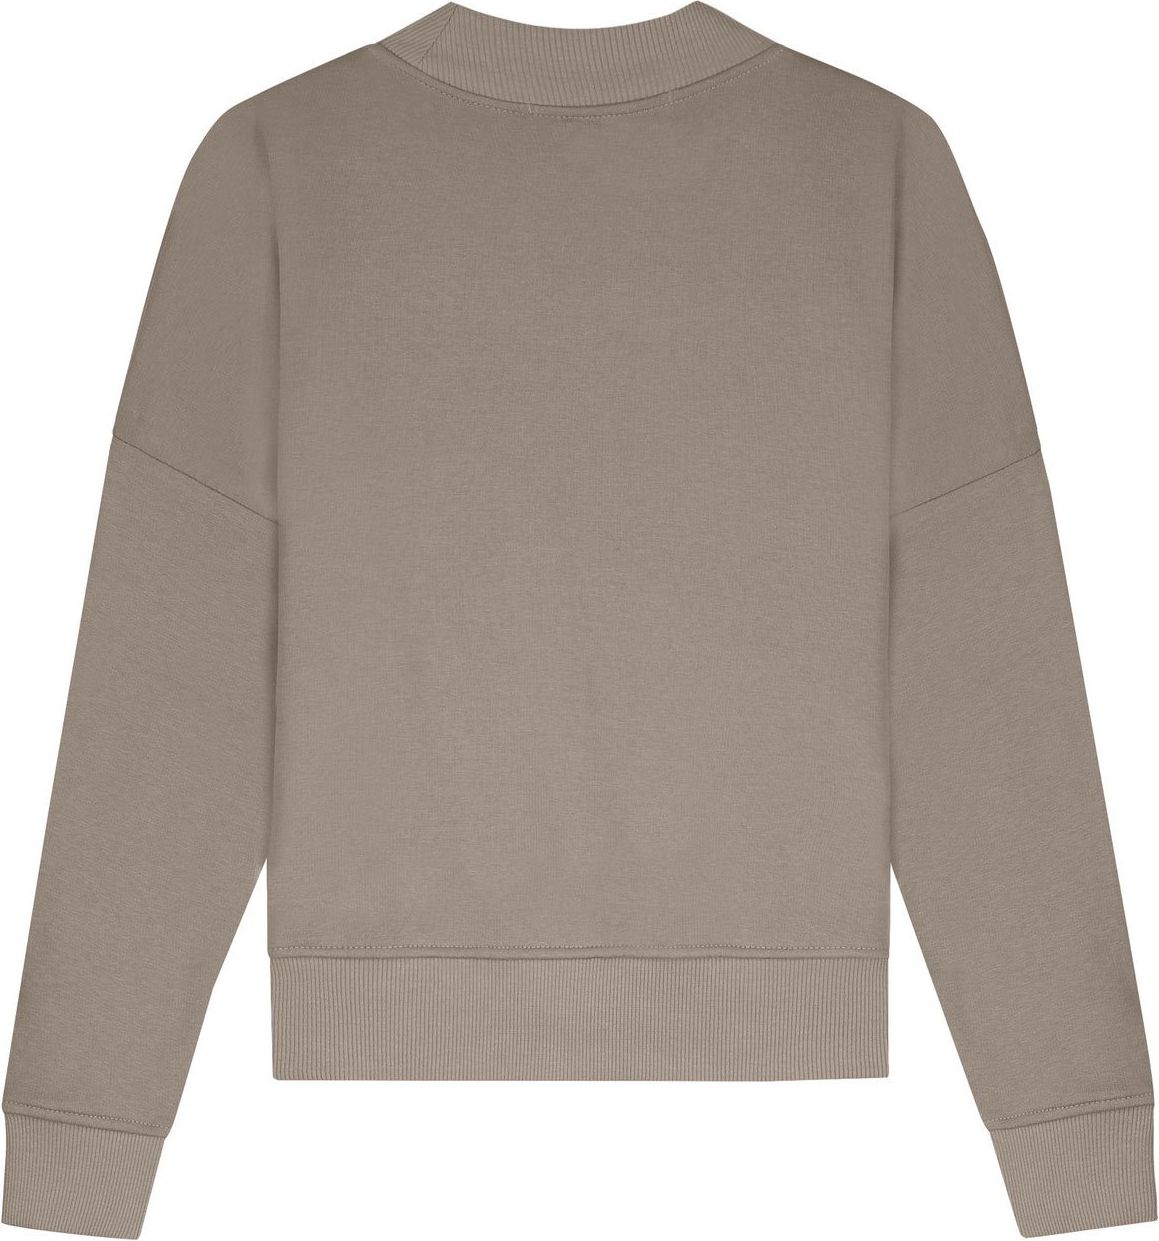 Malelions Brand Sweater - Taupe/Beige Taupe